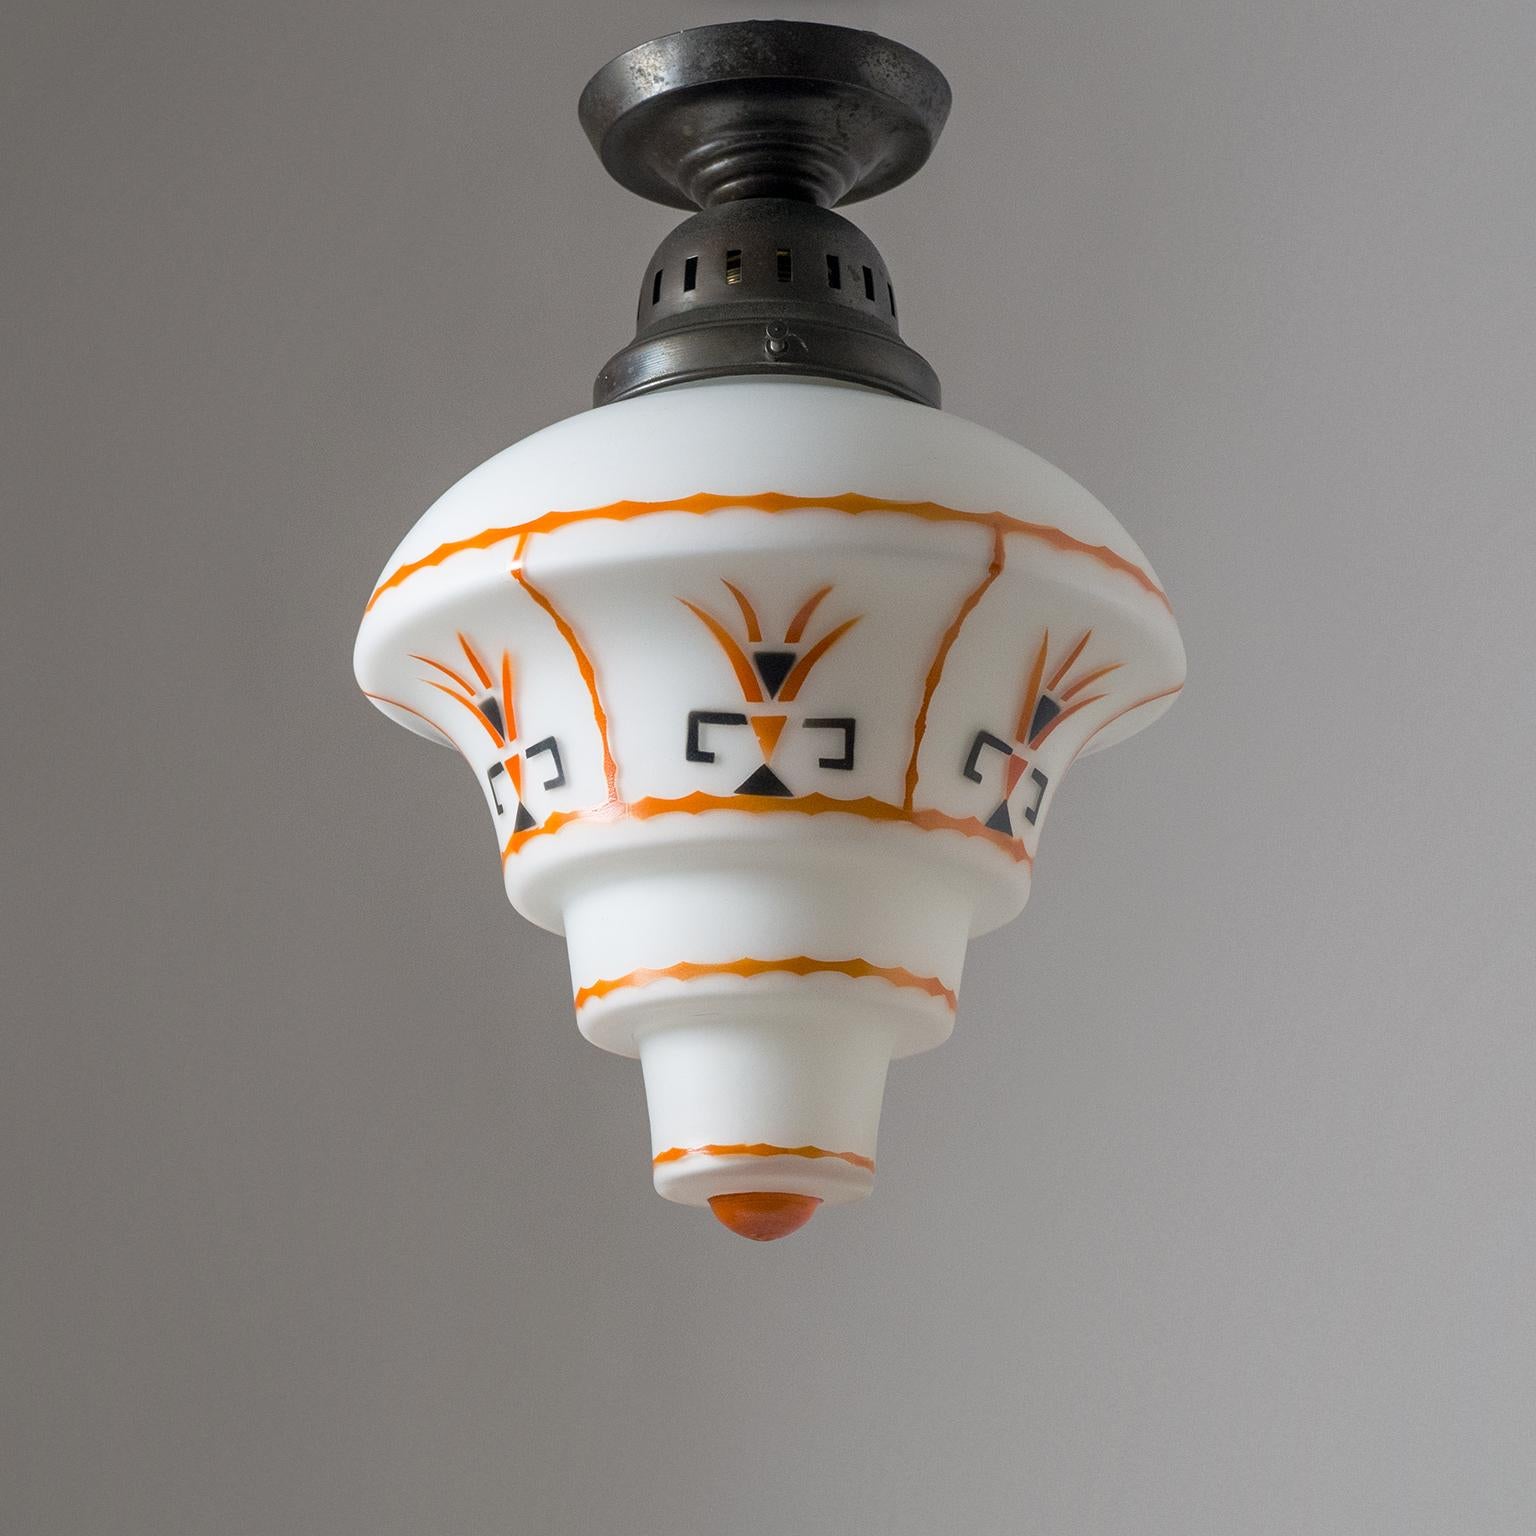 Rare Art Deco ceiling light, early 20th century. Dark patinated brass hardware with a cased glass diffuser which is enameled with an orange and black abstract decor. Very nice original condition with patina on the brass. One original brass and